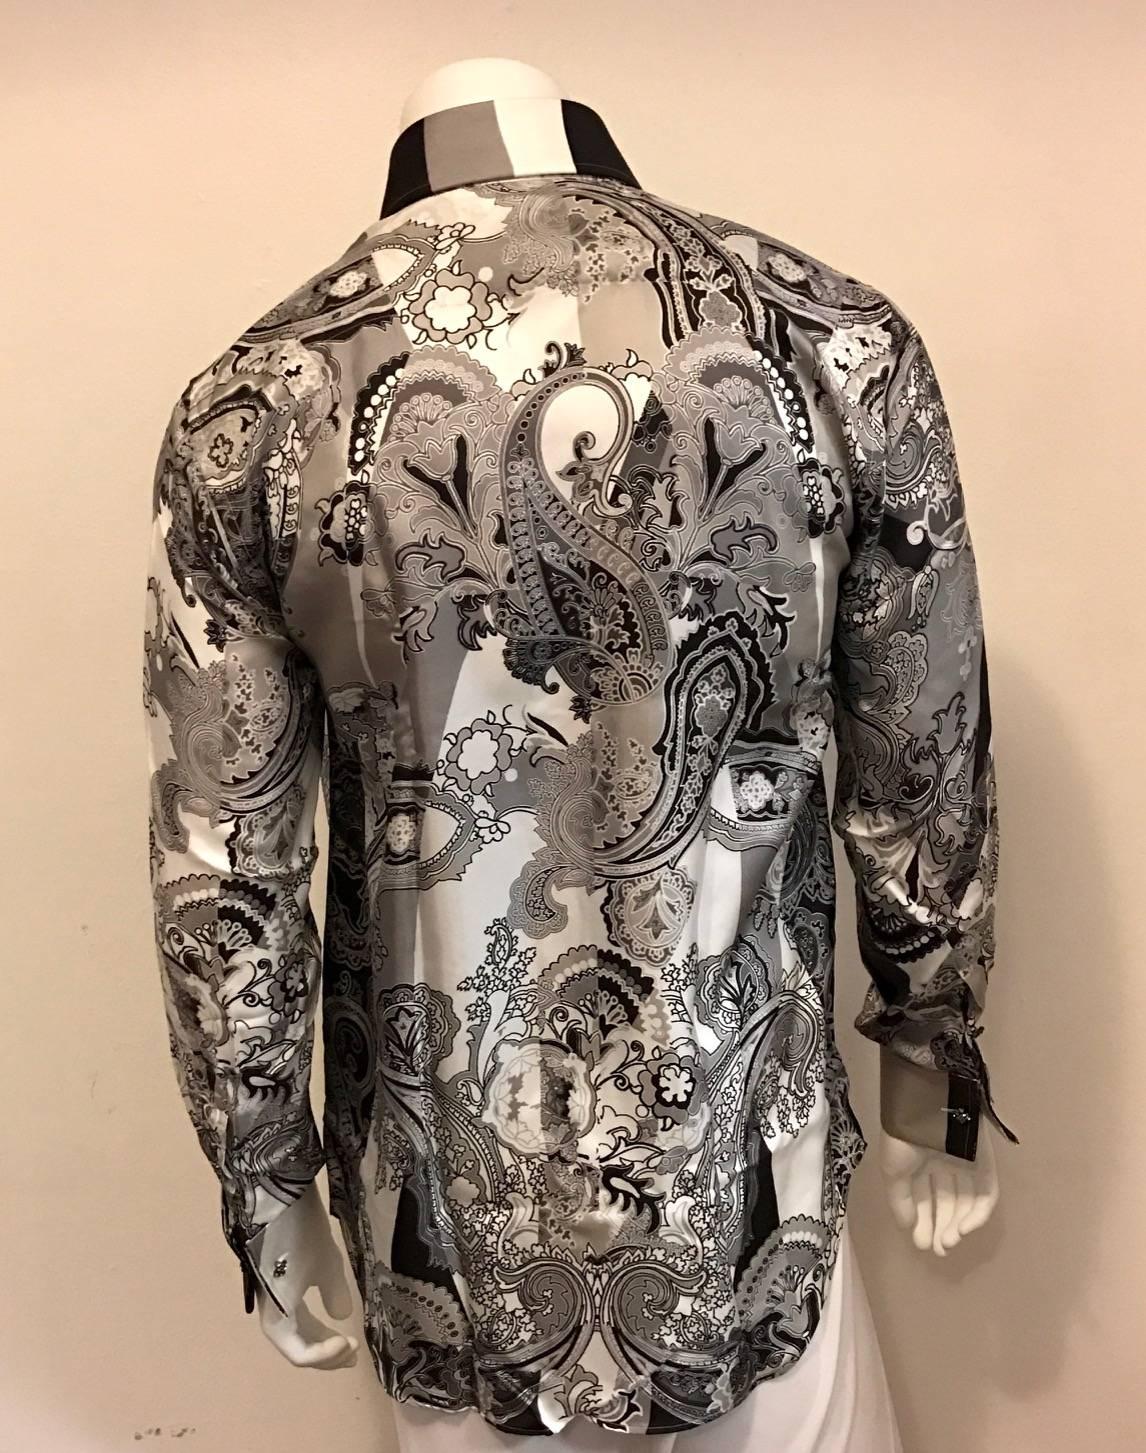 Dress like a billionaire in this soft silk shirt in shades of grey and white paisley.  Crystal buttons in amethyst grace the shirt front and french collar and removable cufflinks.  There are two spare buttons on inside seam. A stunningly rich